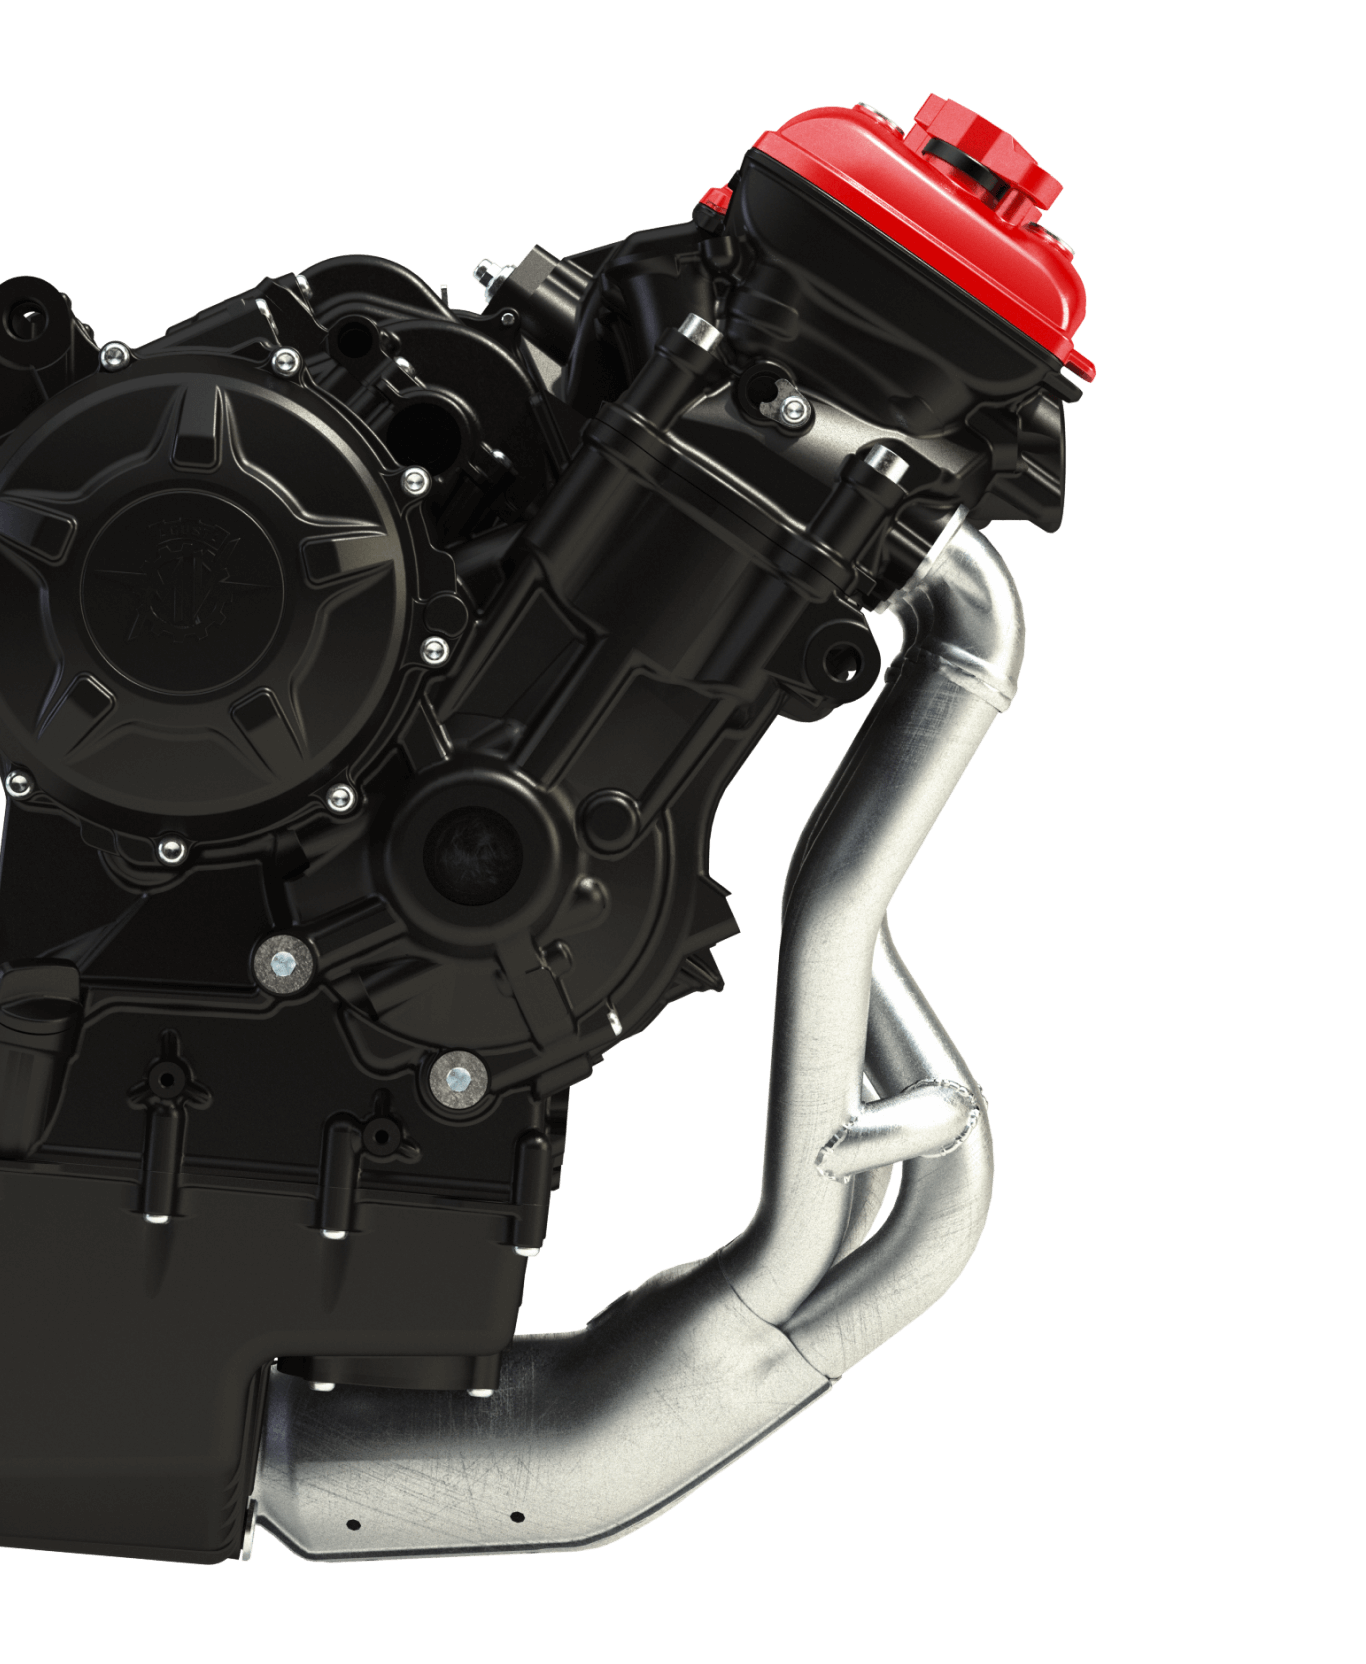 A view of the engine on the new Special Edition Superveloce Ago created in commemoration of Giacomo Agostini